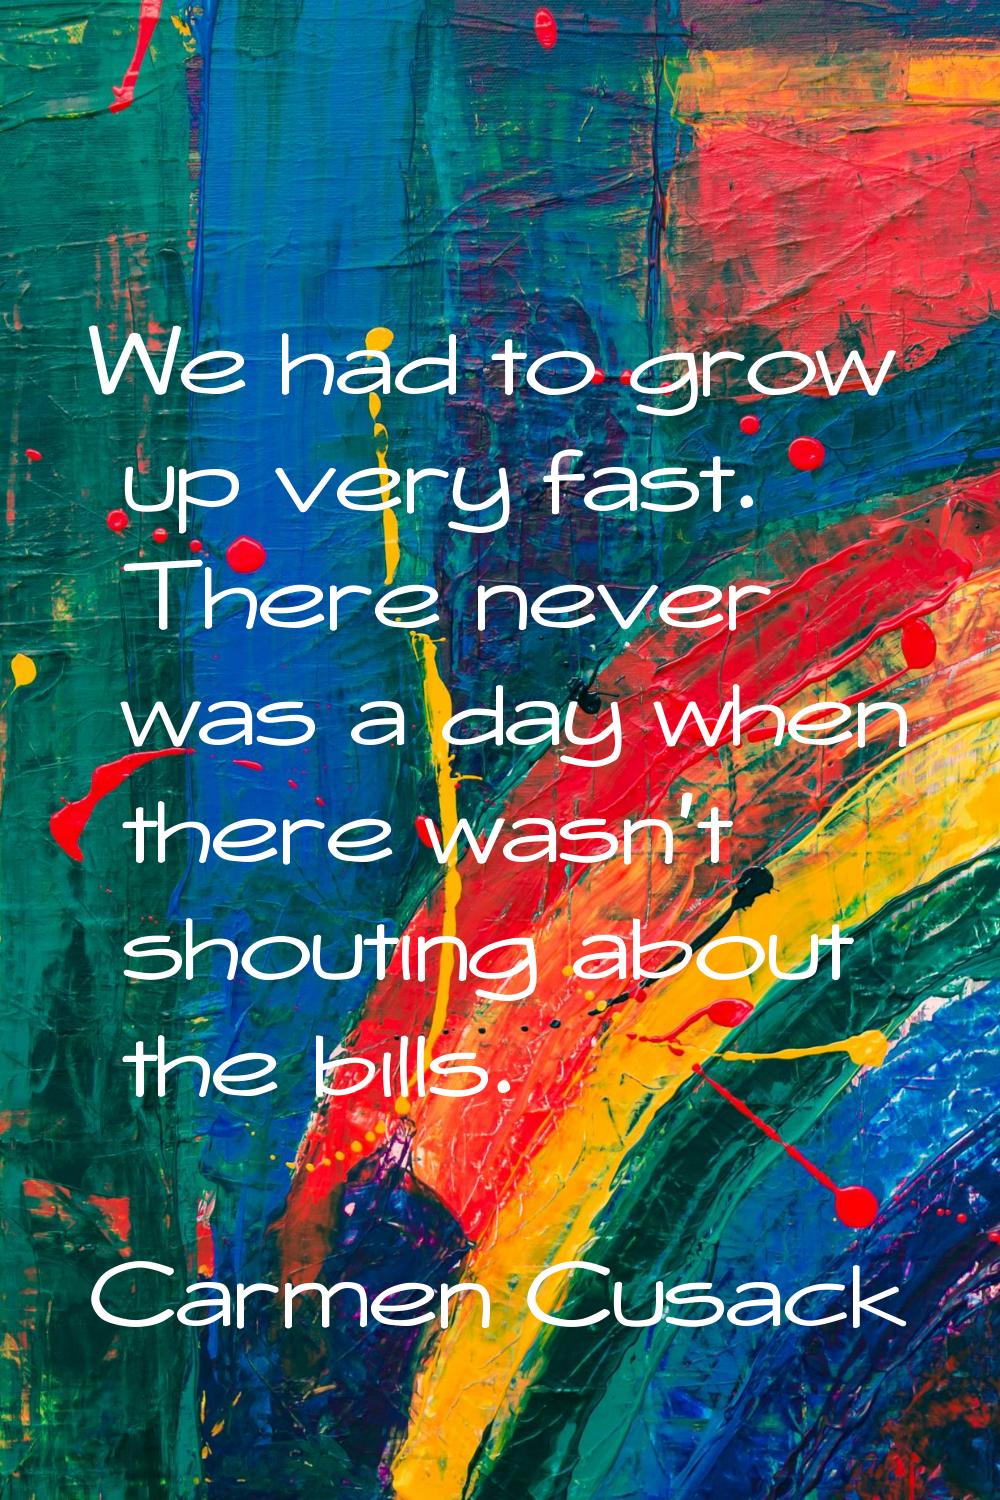 We had to grow up very fast. There never was a day when there wasn't shouting about the bills.